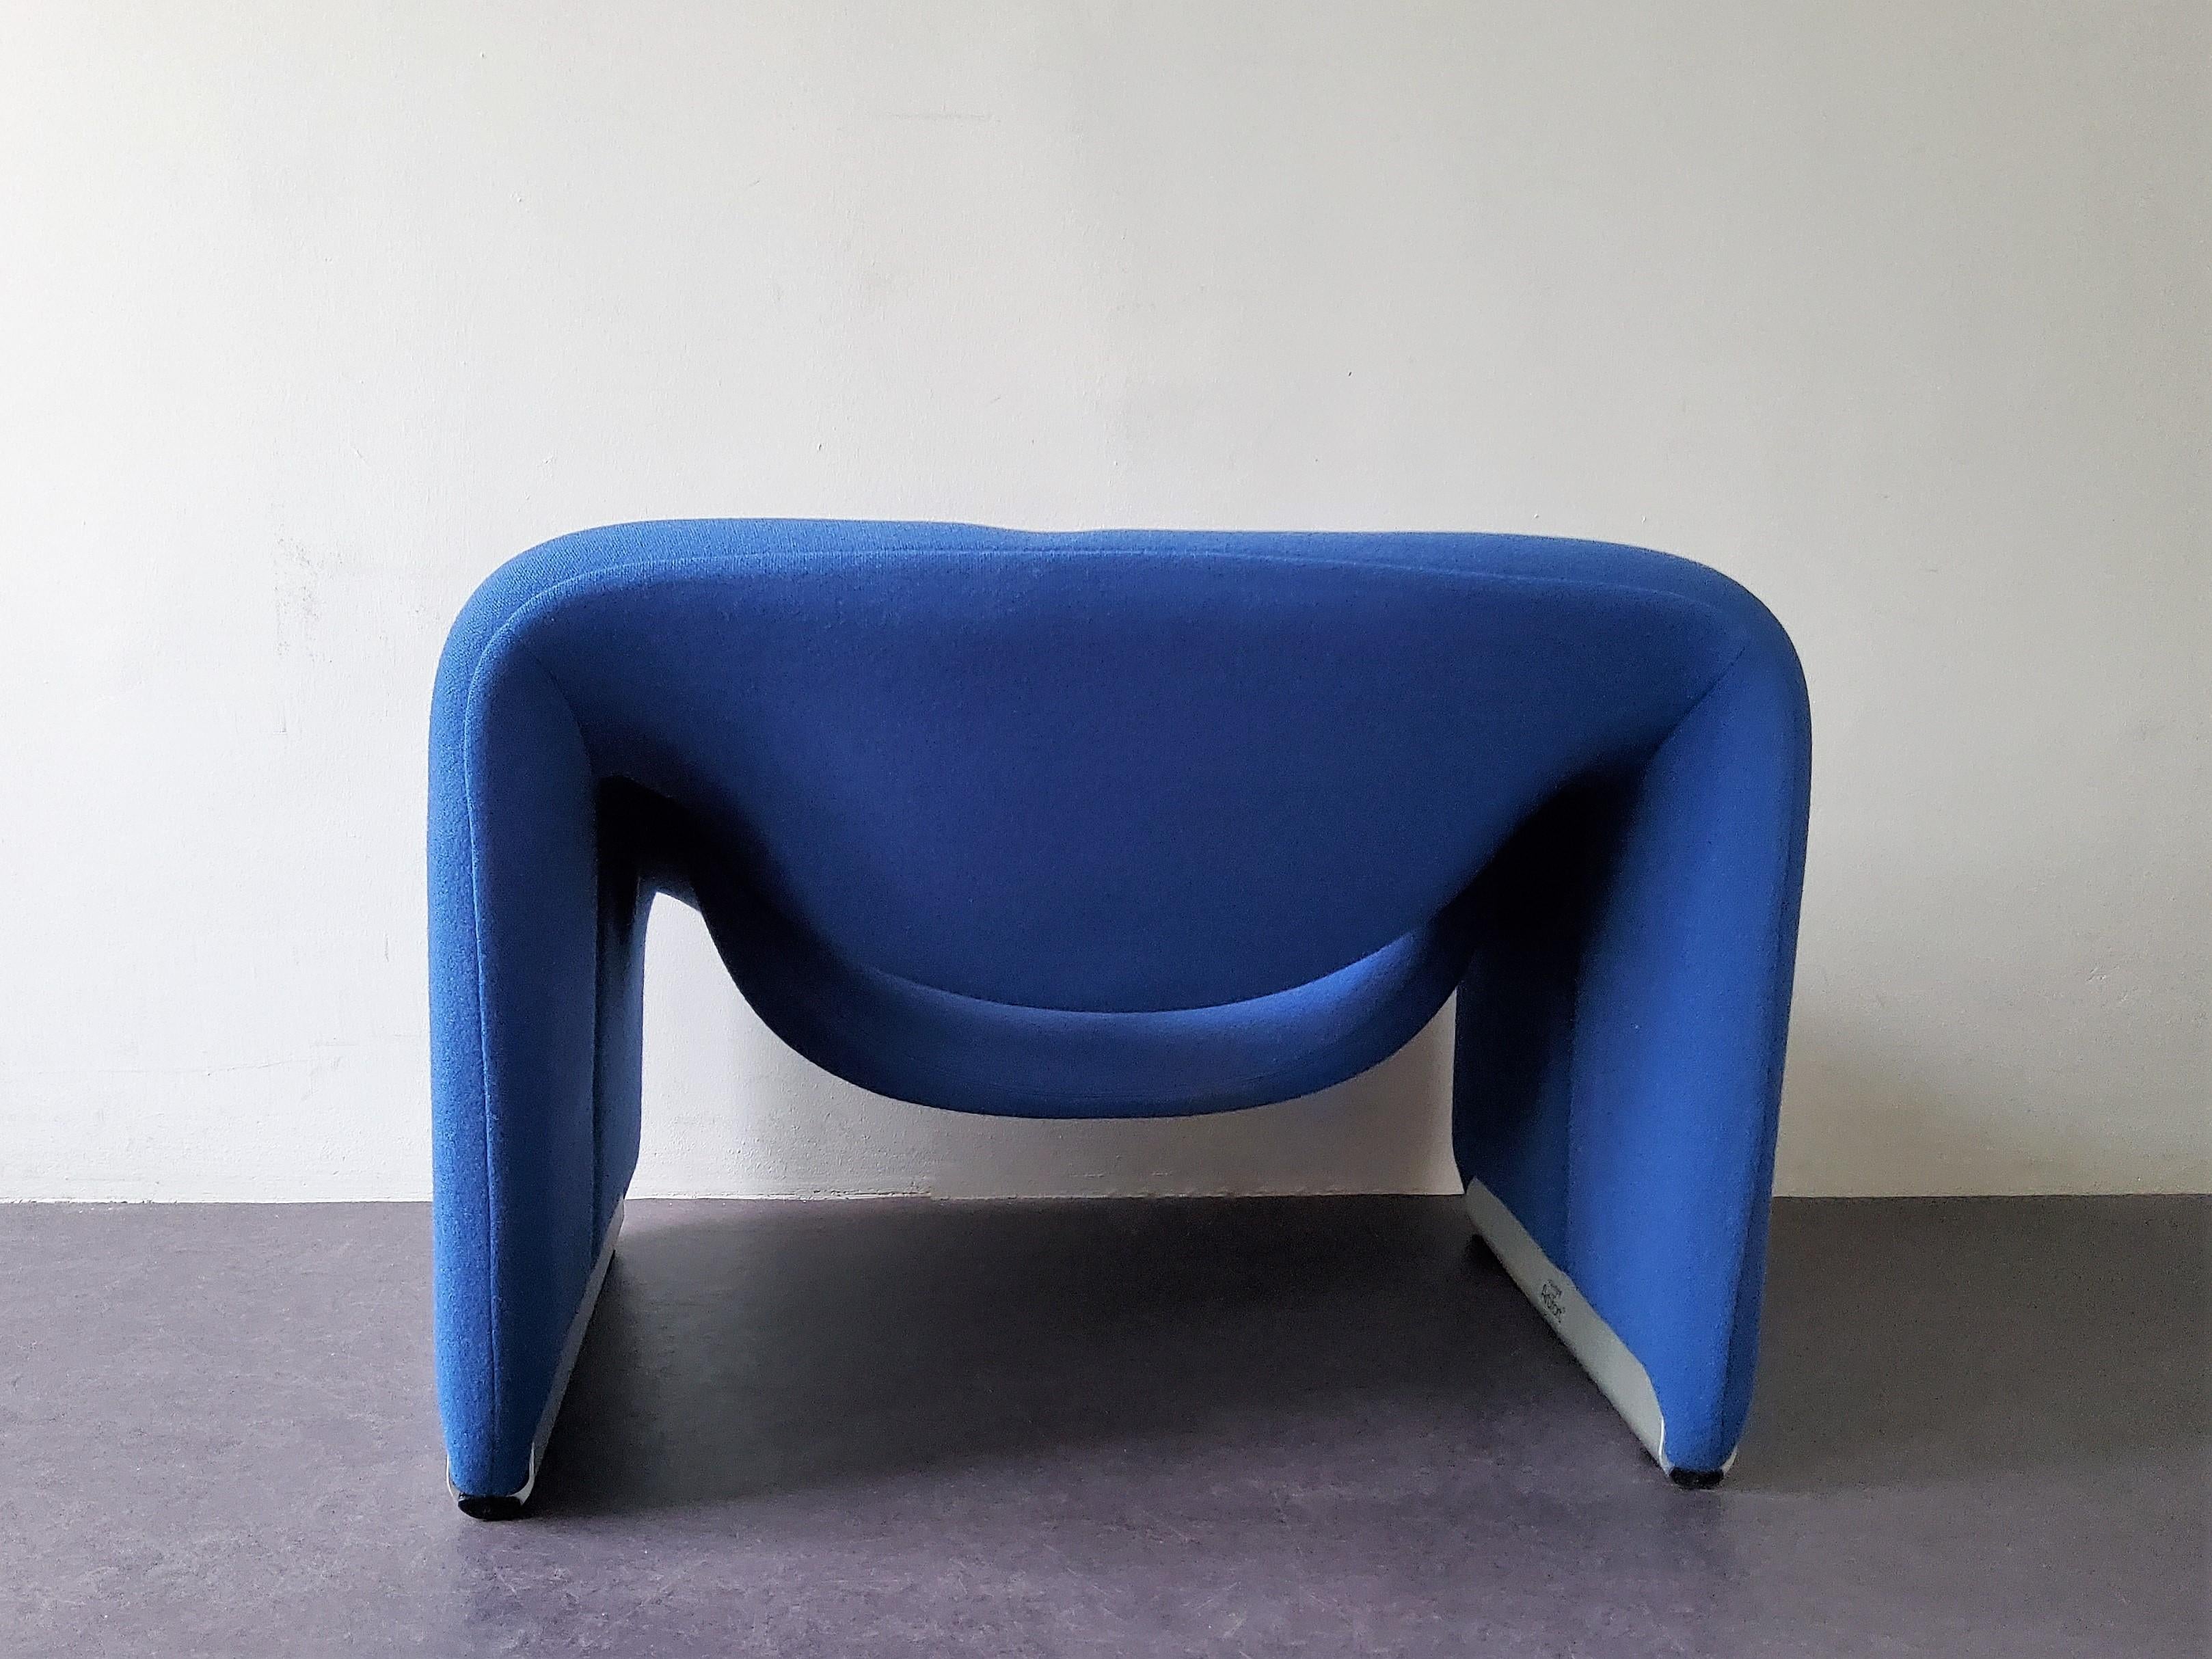 Fabric Vintage 'Groovy' or F598 Lounge Chair in Blue by Pierre Paulin for Artifort